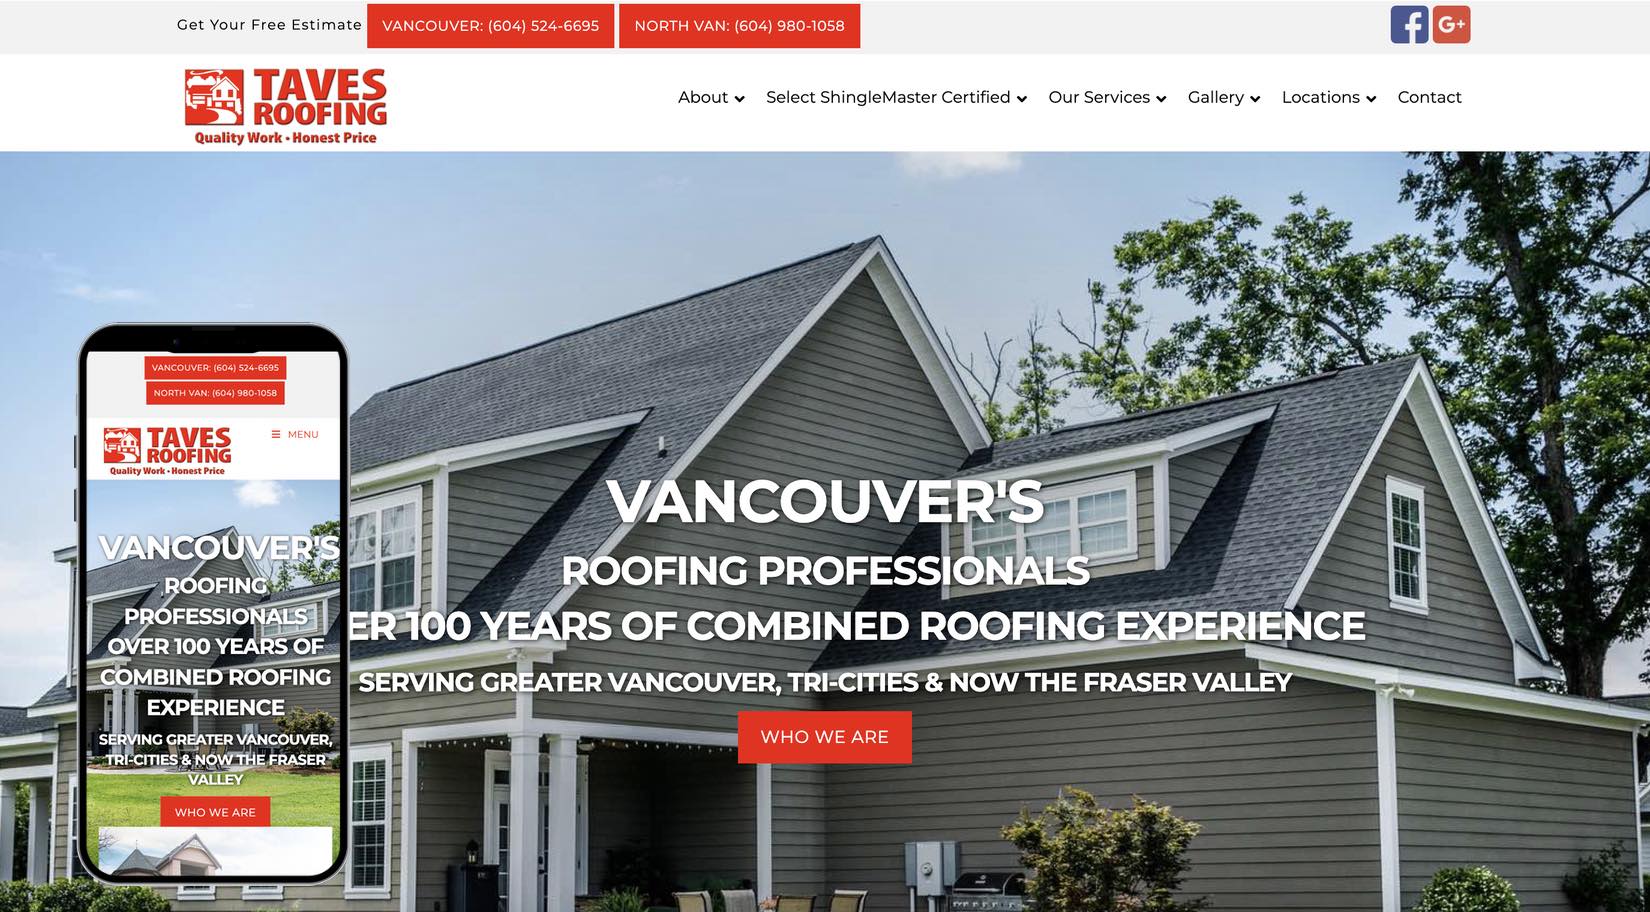 taves-coquitlam-roofing-website-design-project